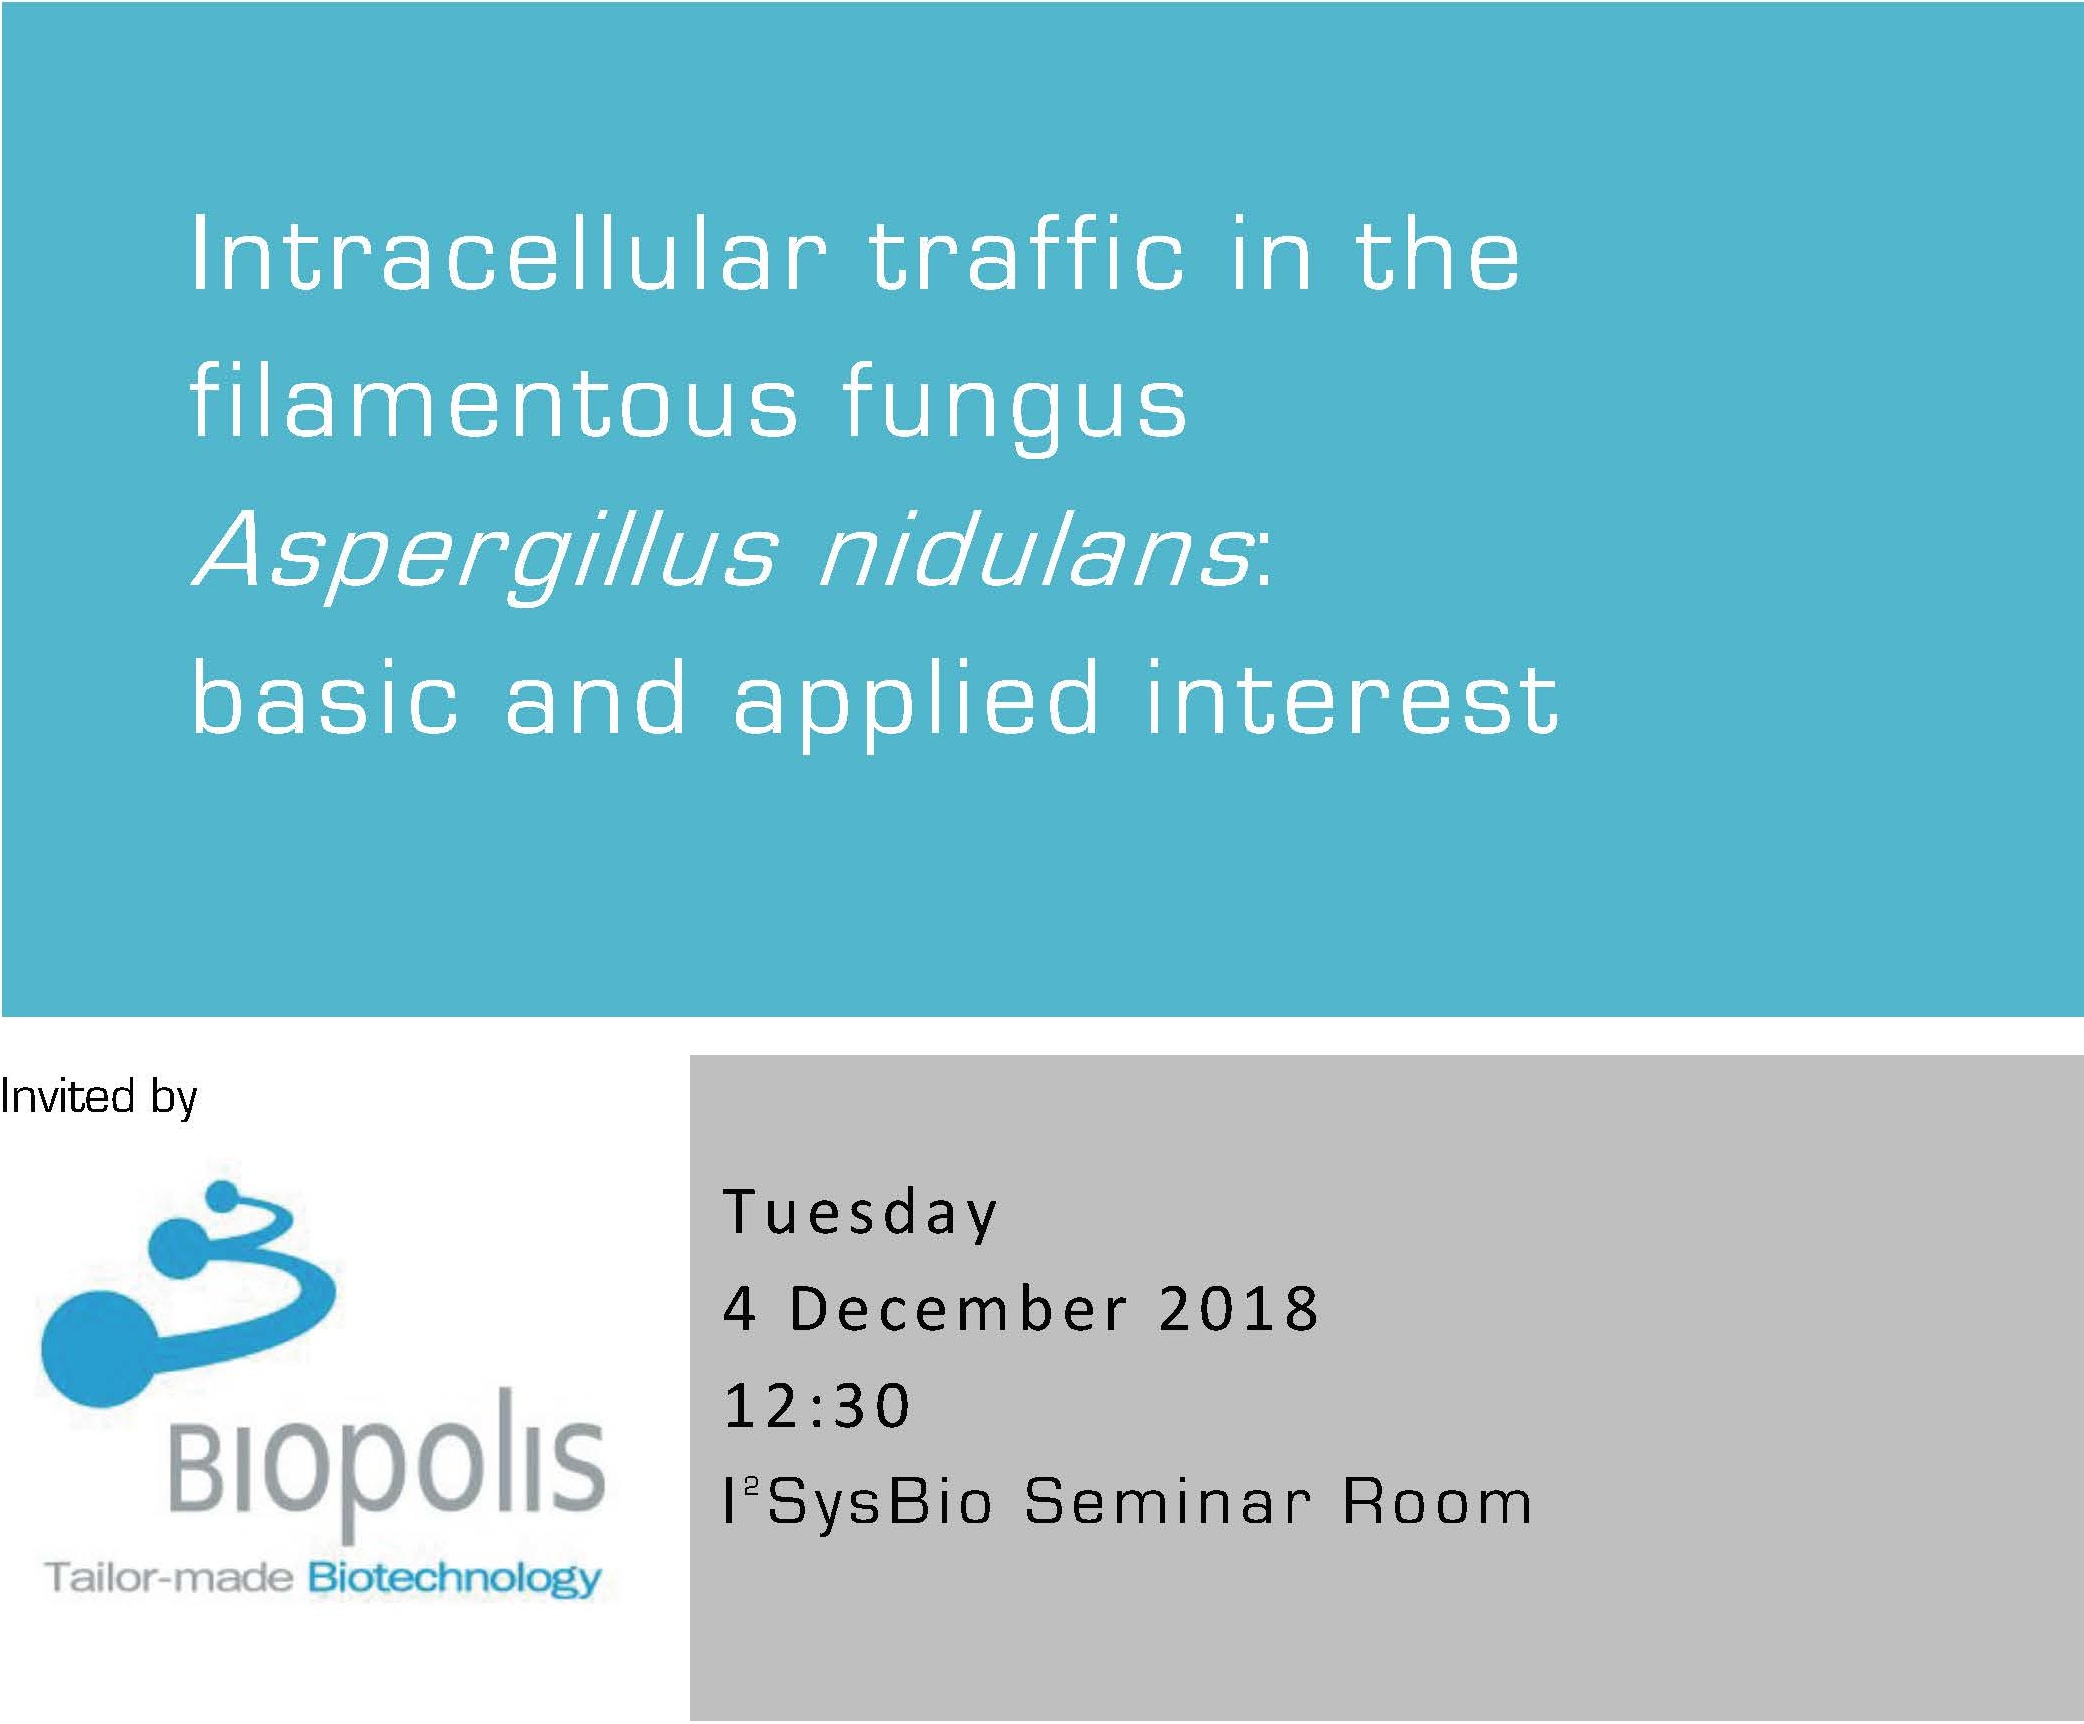 Intracellular traffic in the filamentous fungus Aspergillus nidulans : basic and applied interest